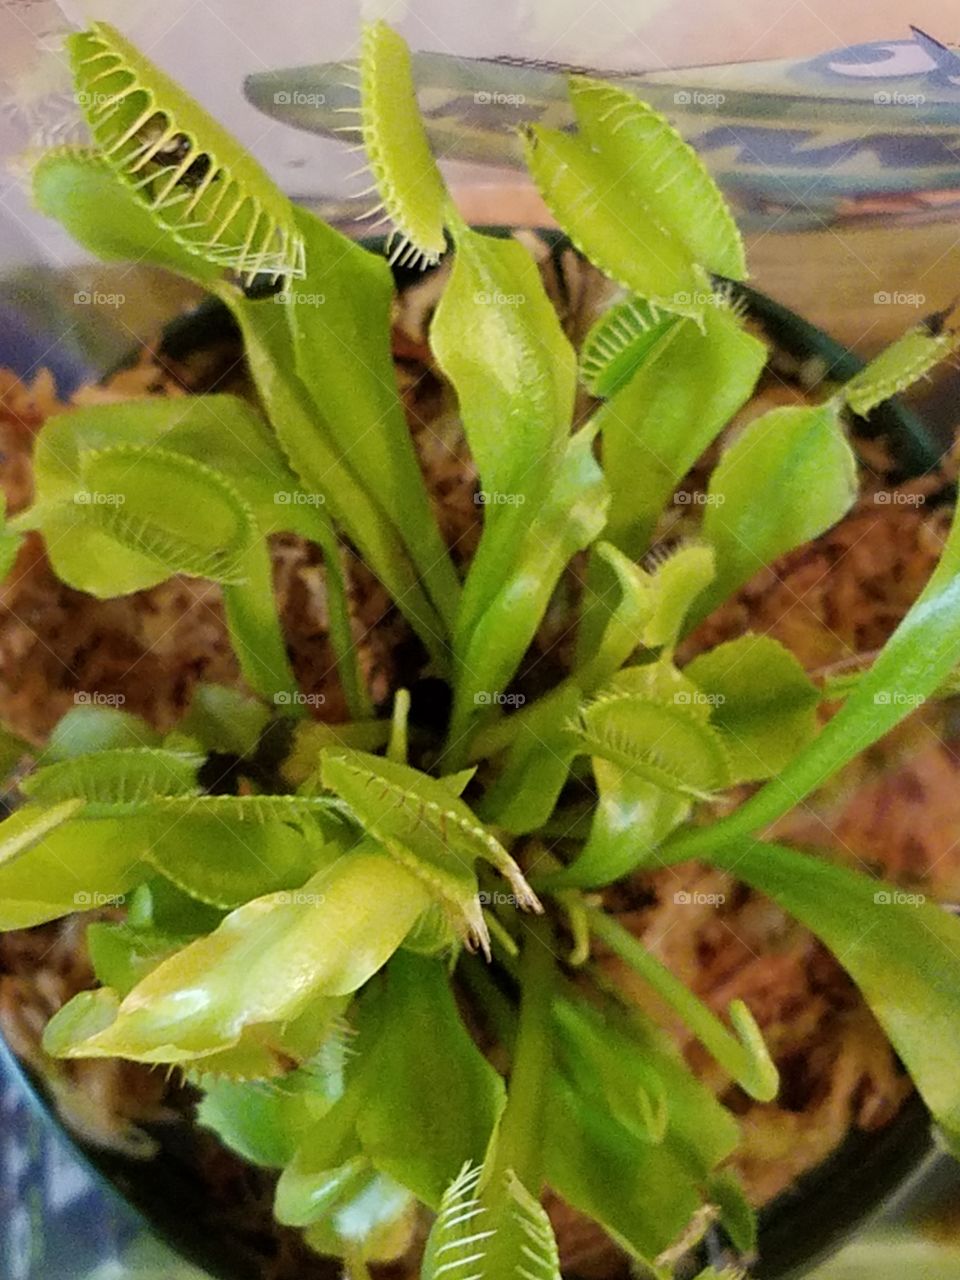 Venus Fly Trap enjoying it's fly that landed right into the pod... a lot of empty pods ready for a meal!